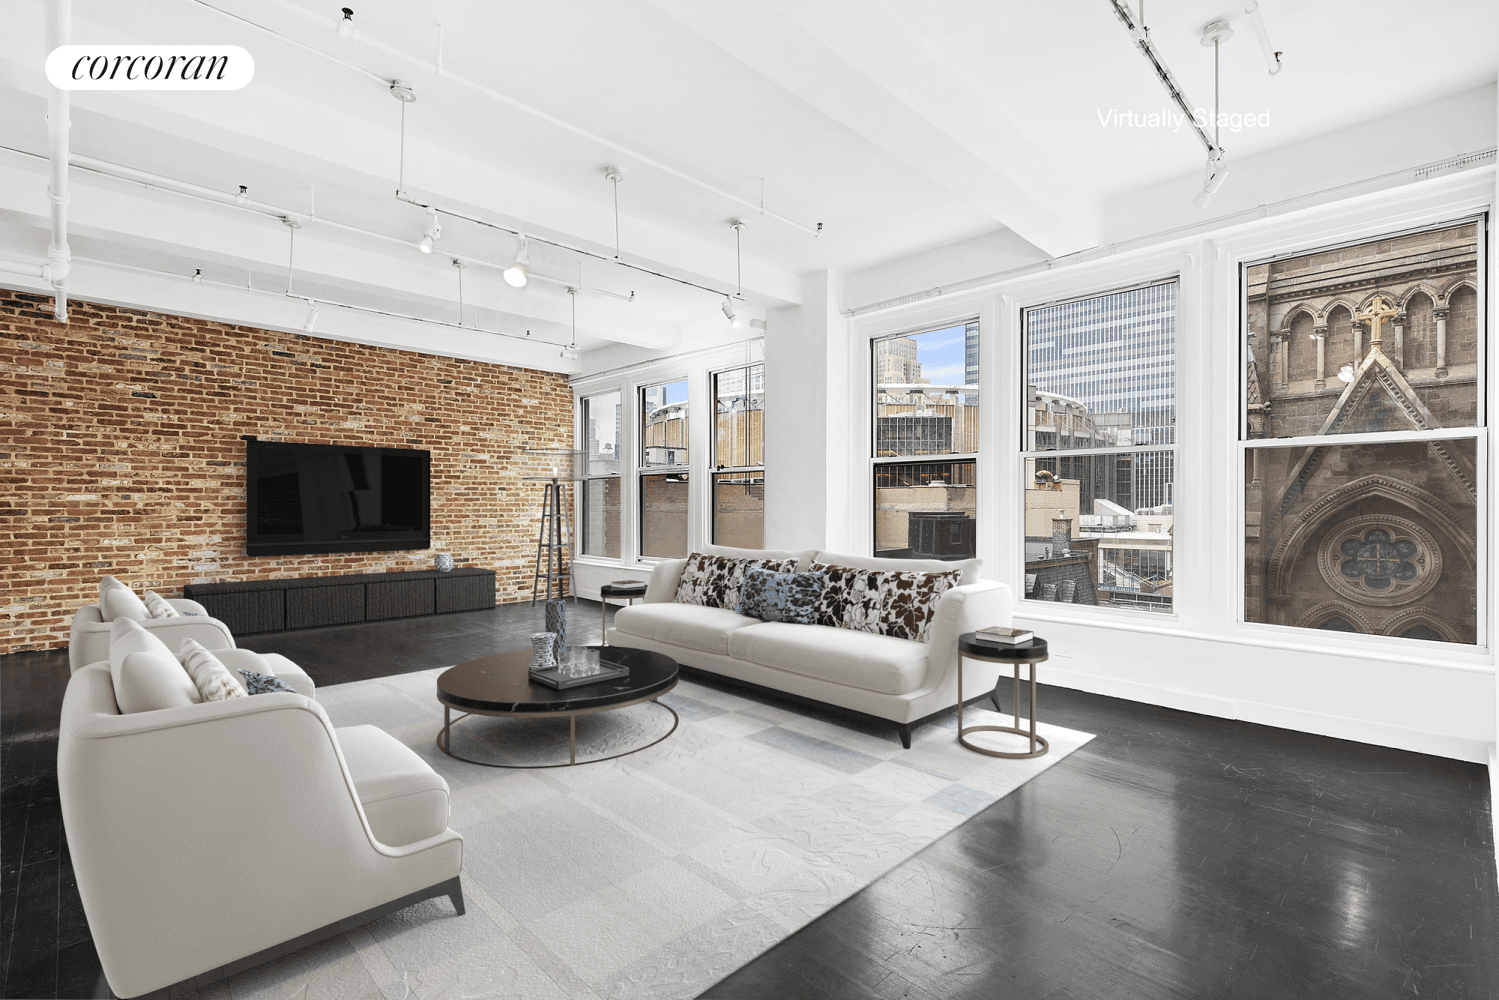 This massive Chelsea Live Work Loft, is on the 6th floor with north facing views, high ceilings, and is full of natural light which streams in via over sized windows ...